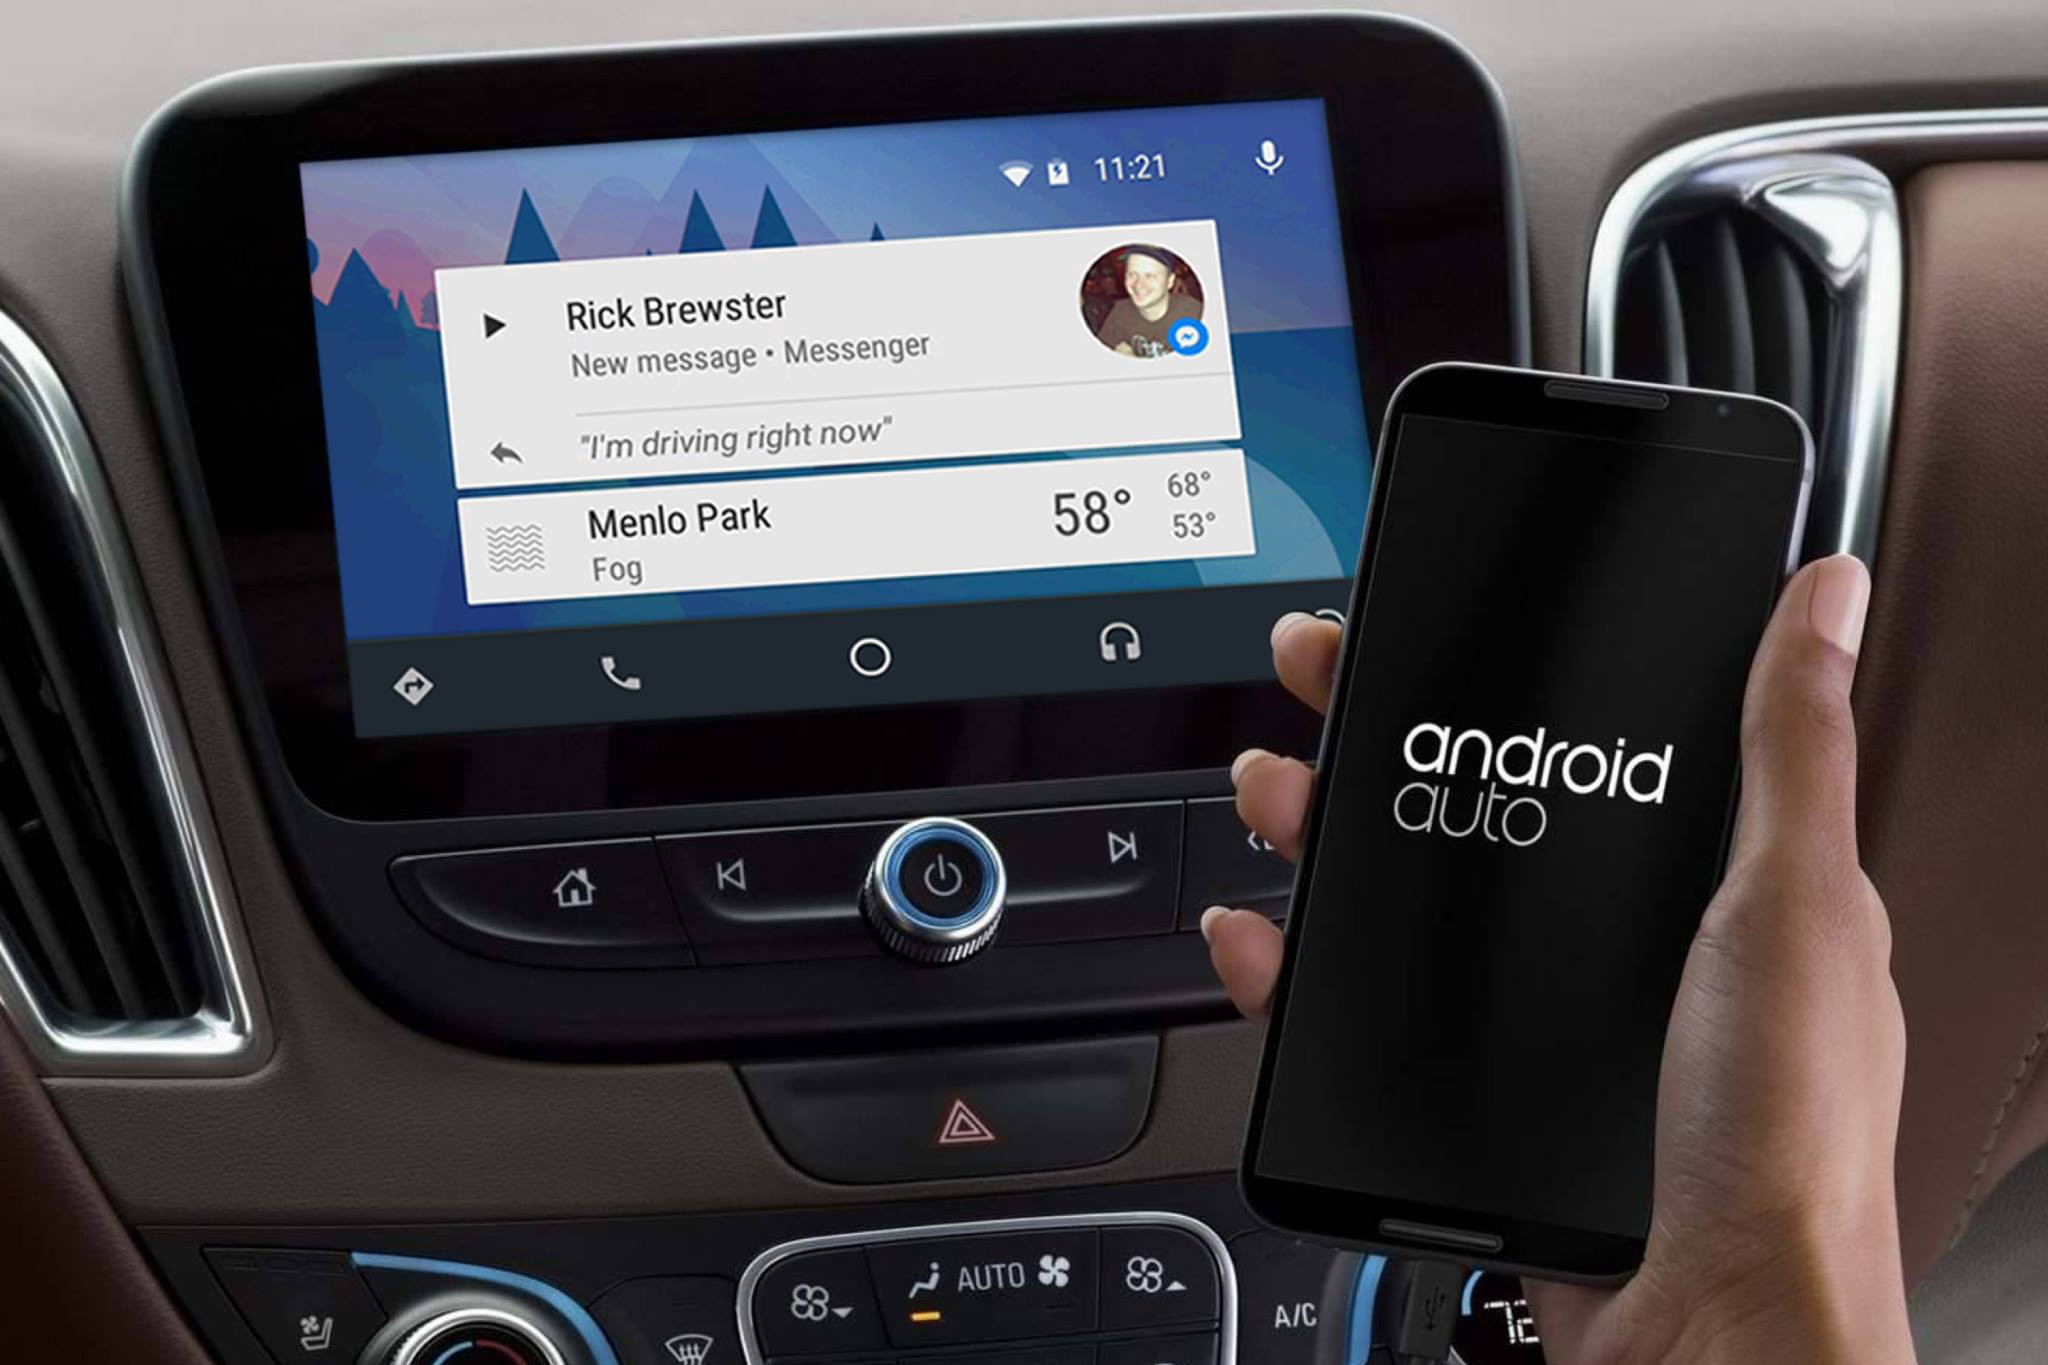 Best smartphone apps for cars - Android Auto: Stay Connected with Your Android Device